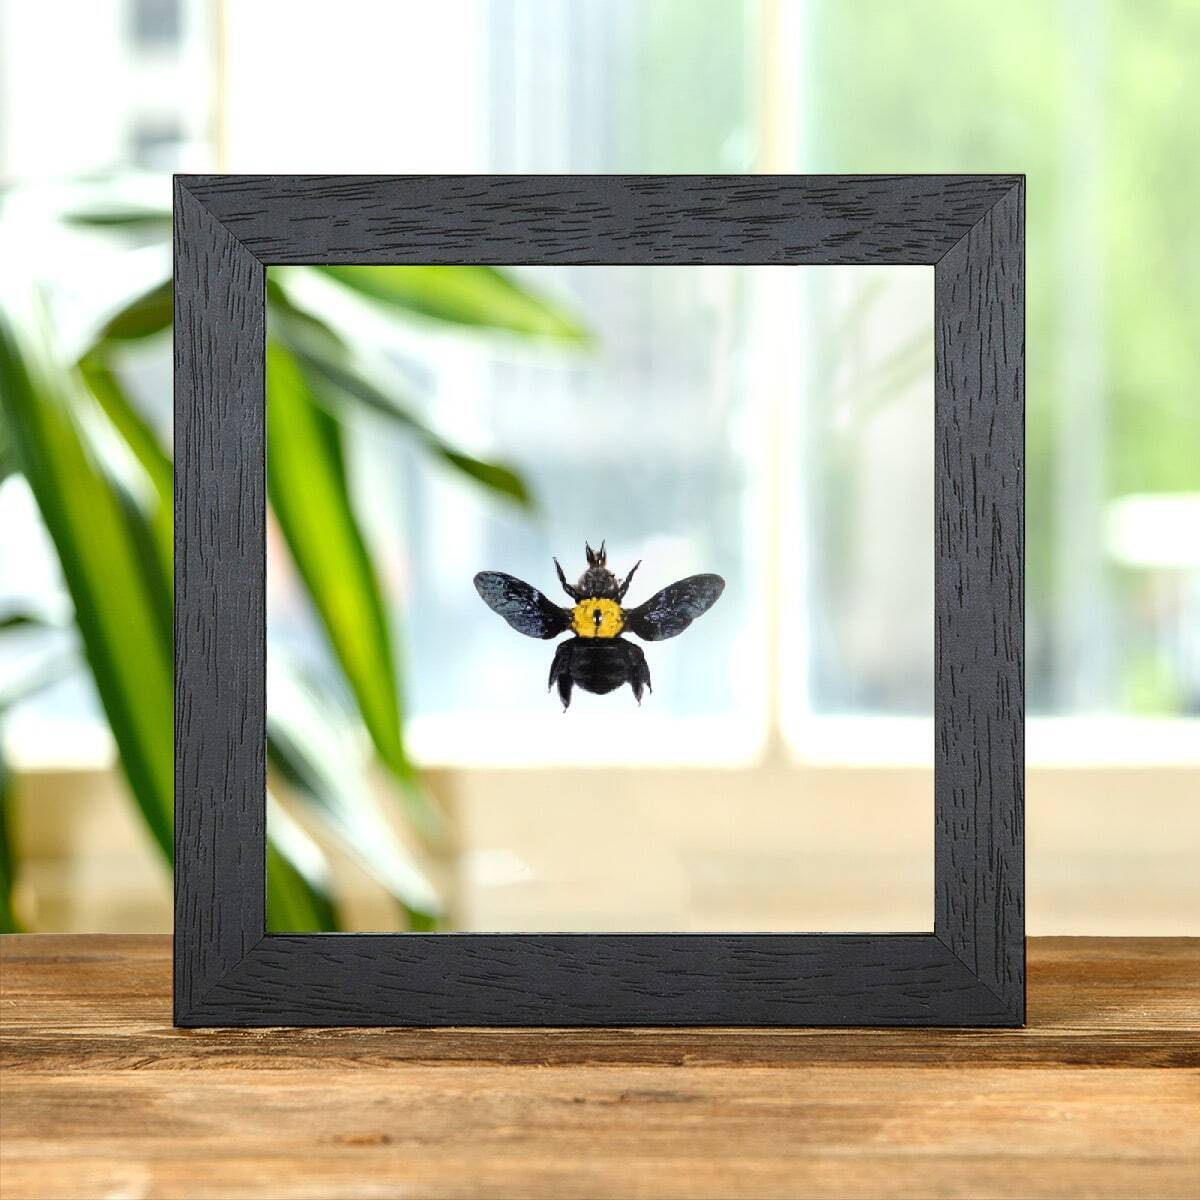 The Yellow Spot Carpenter Taxidermy Bee in Clear Glass Frame (Xylocopa confusa)